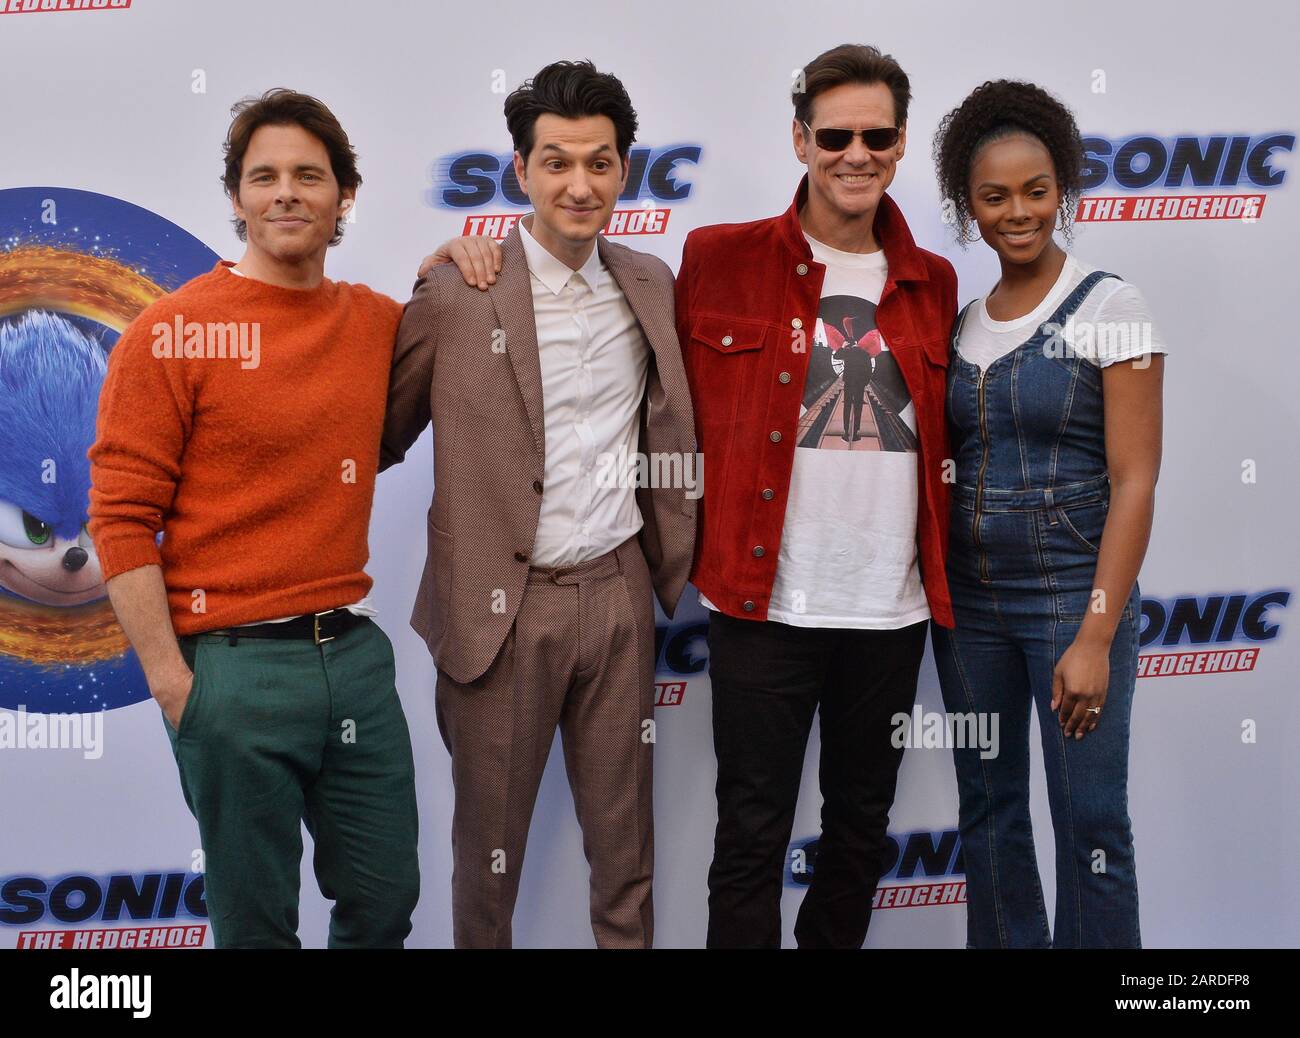 Cast member Ben Schwartz attends the Sonic the Hedgehog family day event  on the Paramount Pictures lot in Los Angeles on Saturday, January 25, 2020.  Storyline: Based on the global blockbuster videogame